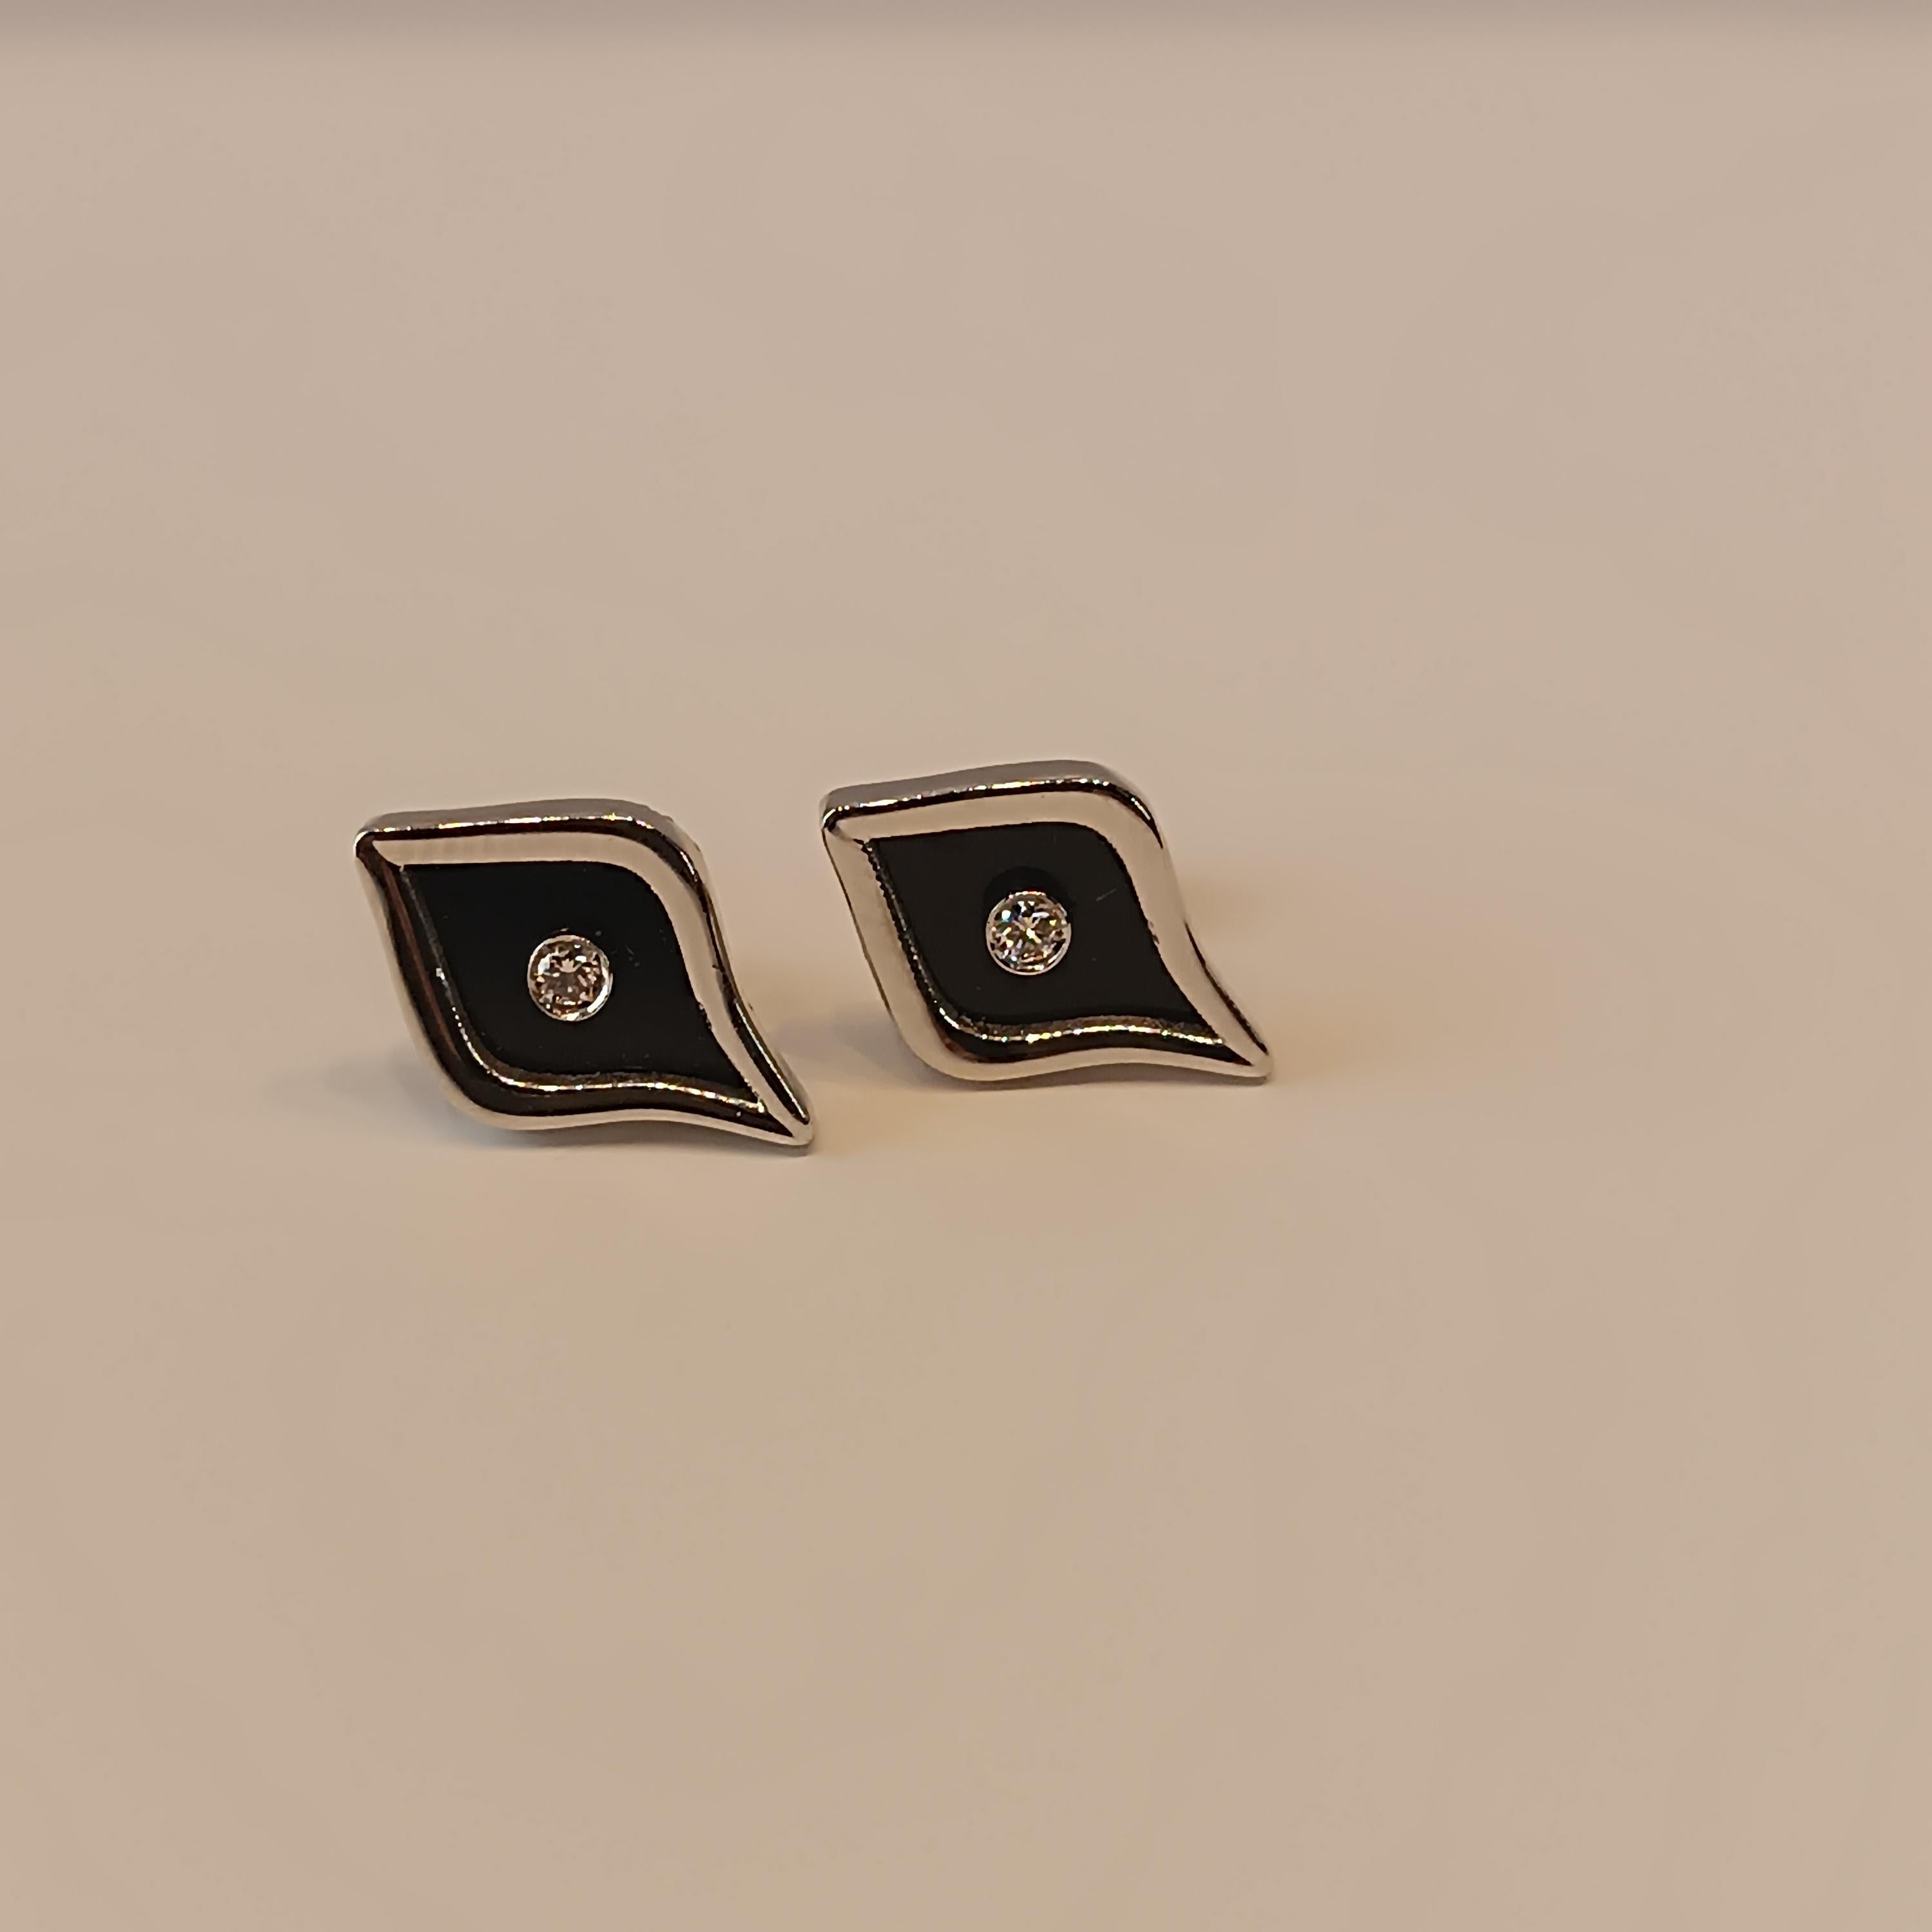 0.6 Carat VS G Diamonds on 18 Carat White Gold Onyx  Earrings In New Condition For Sale In Milano, MI